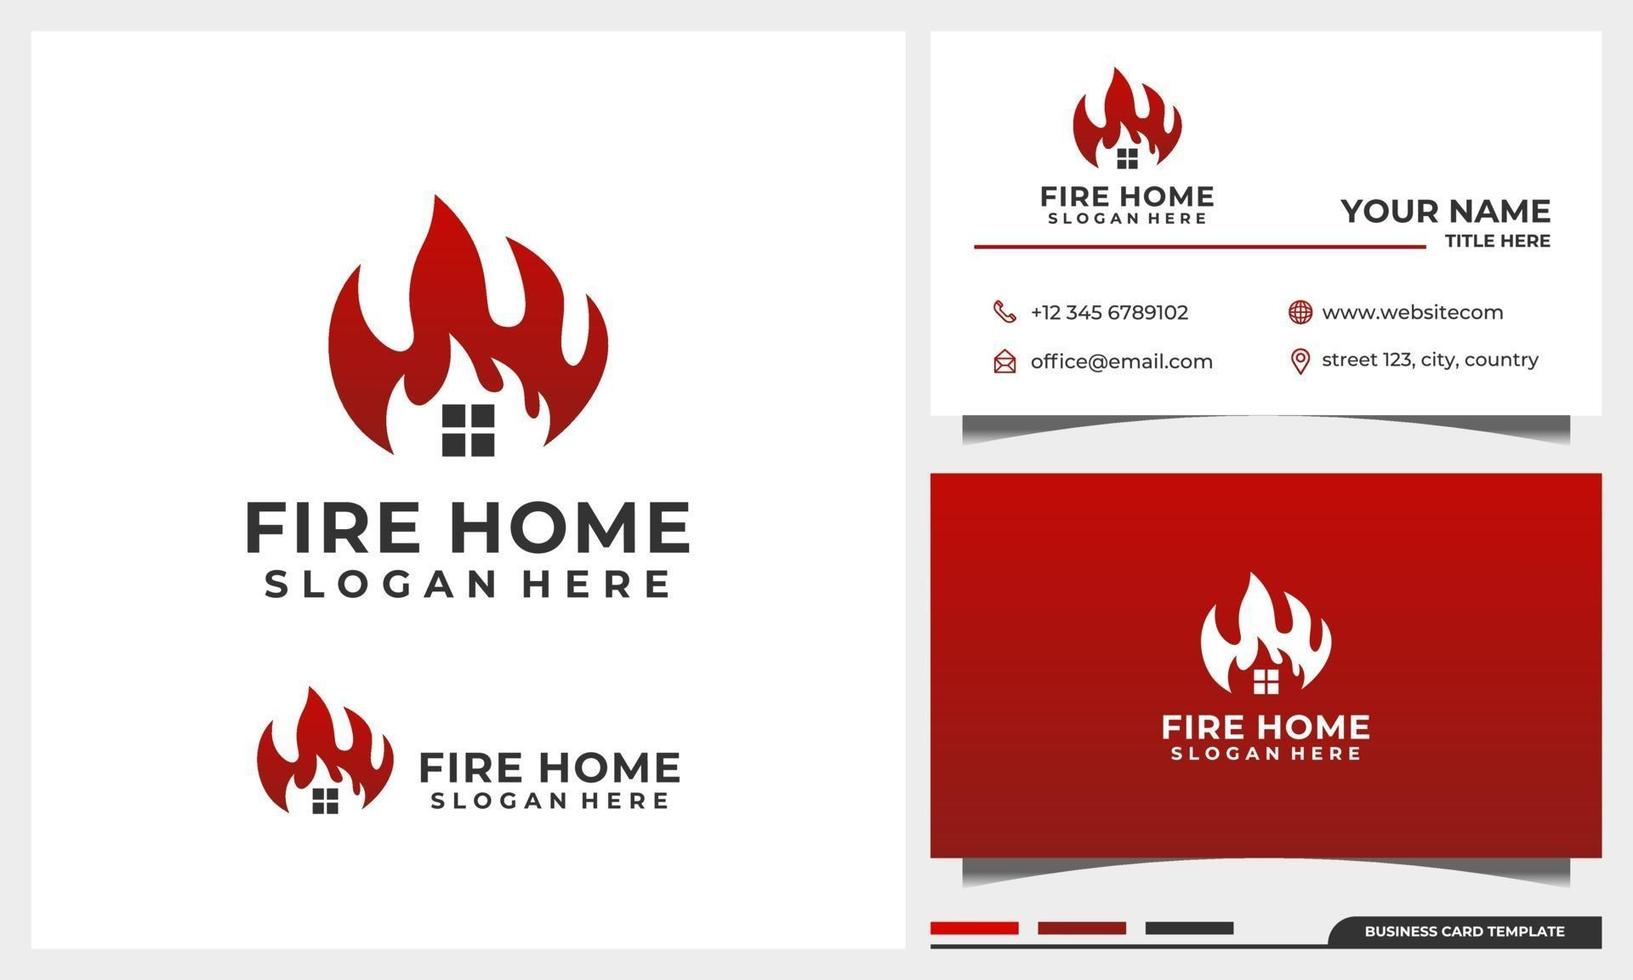 Fire and flame logo design with house and home concept and business card template set vector